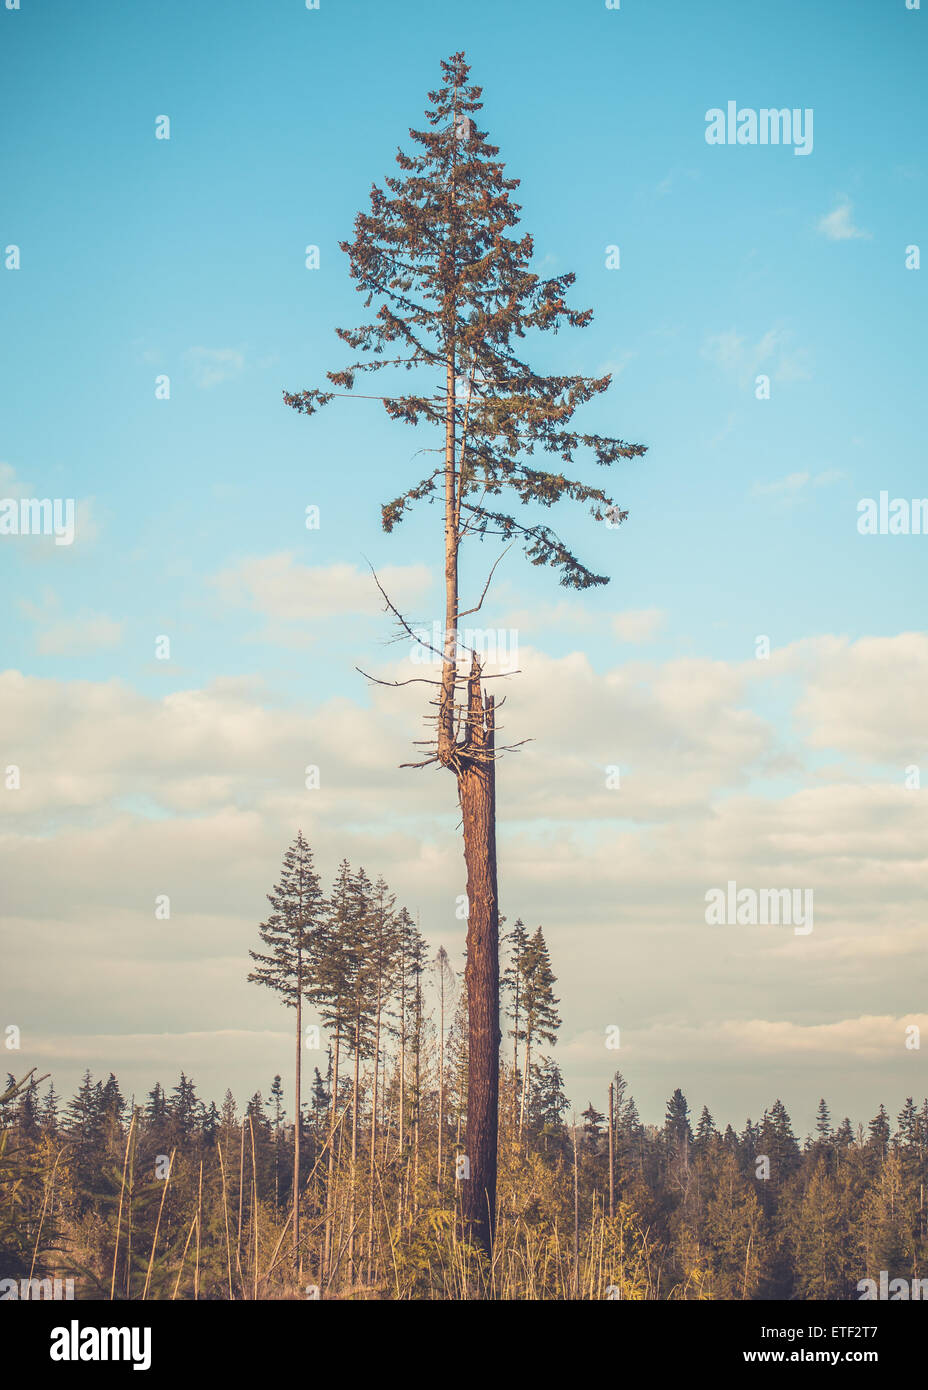 A young evergreen fir tree grows from the trunk of an older dead tree Stock Photo